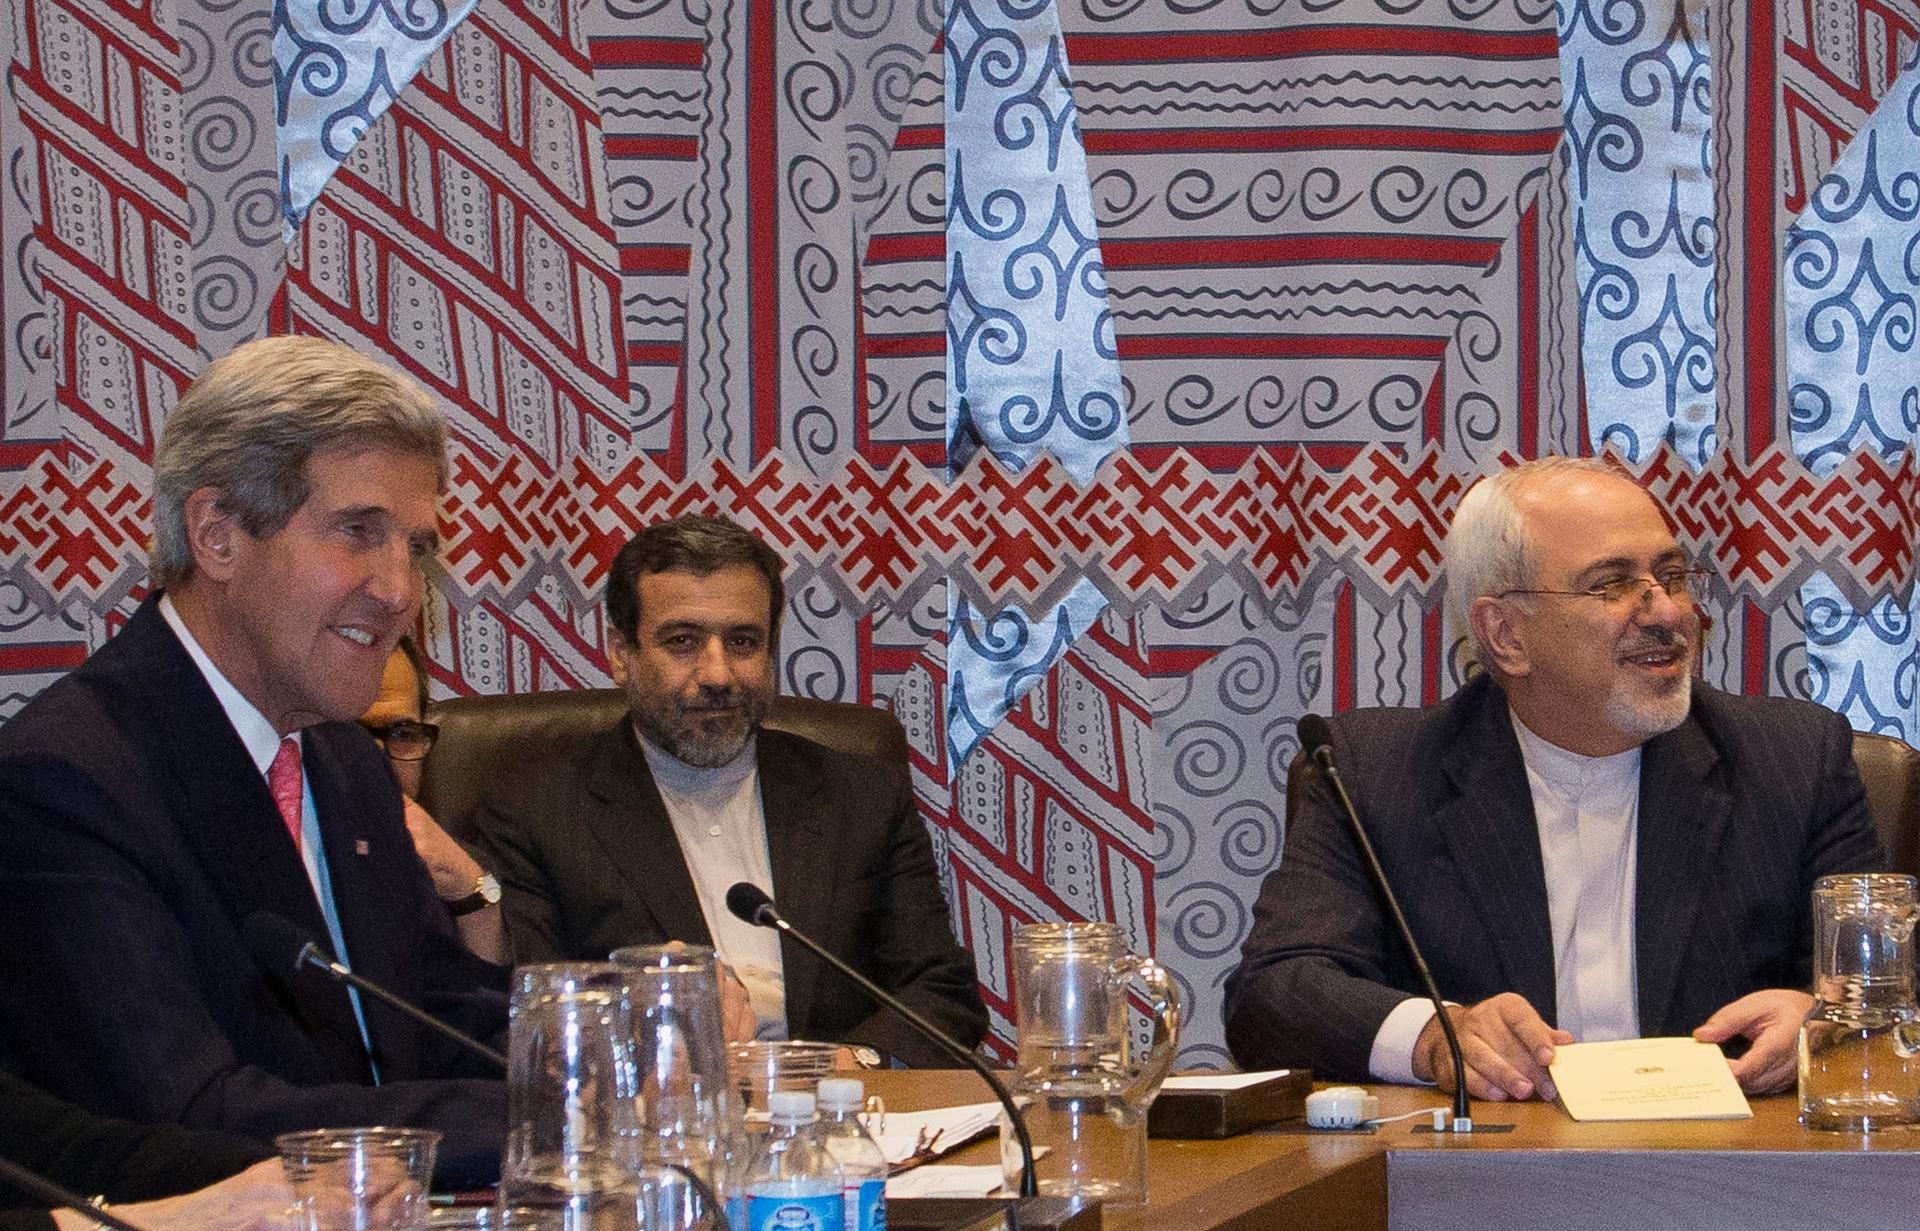 US Secretary of State John Kerry (L) and Iran's Foreign Minister Mohammad Javad Zarif (R) are seated during a meeting at the United Nations.